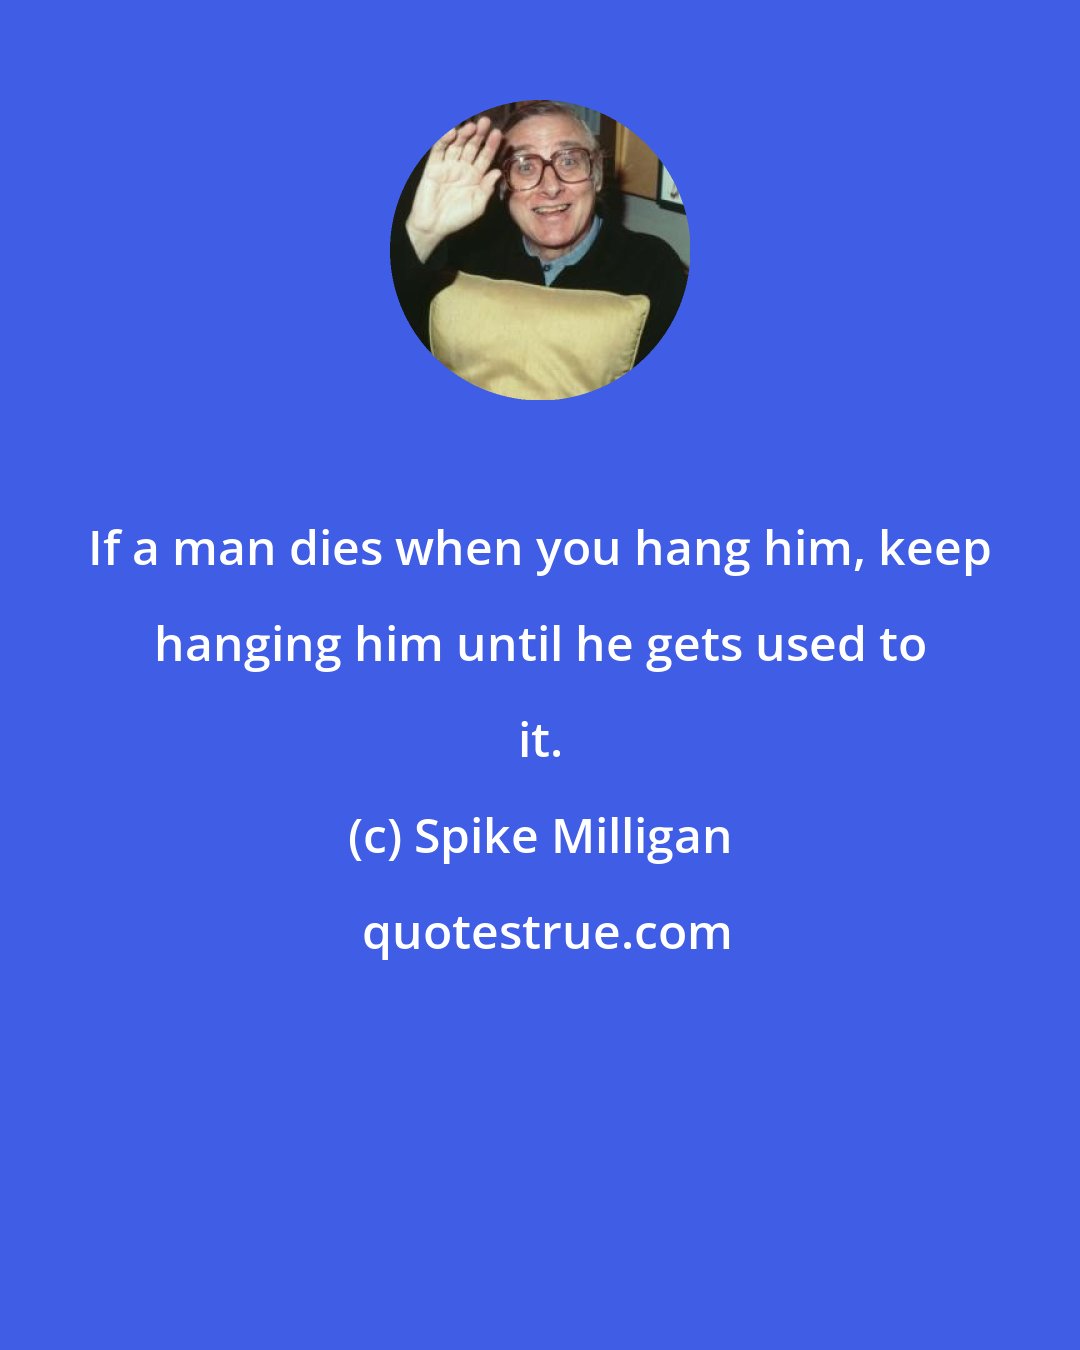 Spike Milligan: If a man dies when you hang him, keep hanging him until he gets used to it.